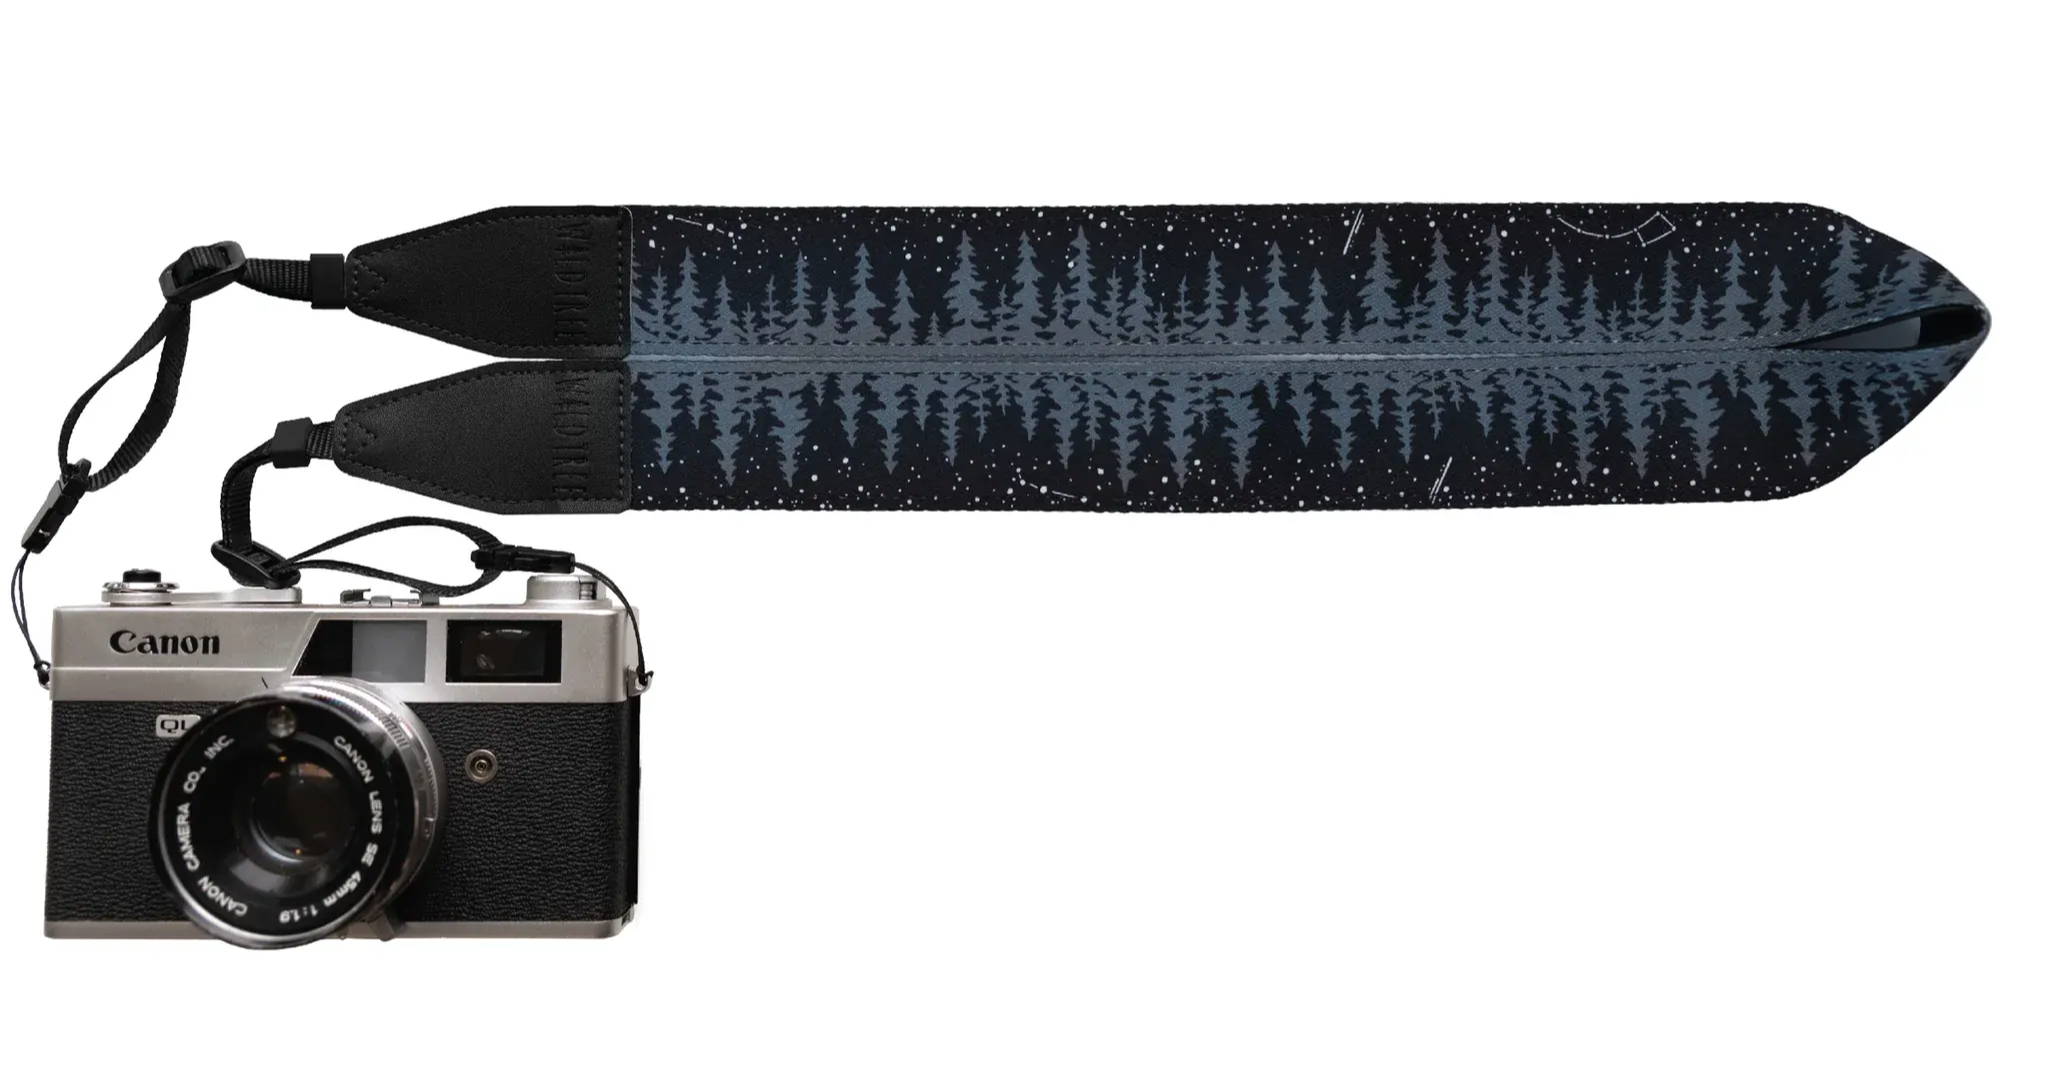 Neck camera strap with night time design. 